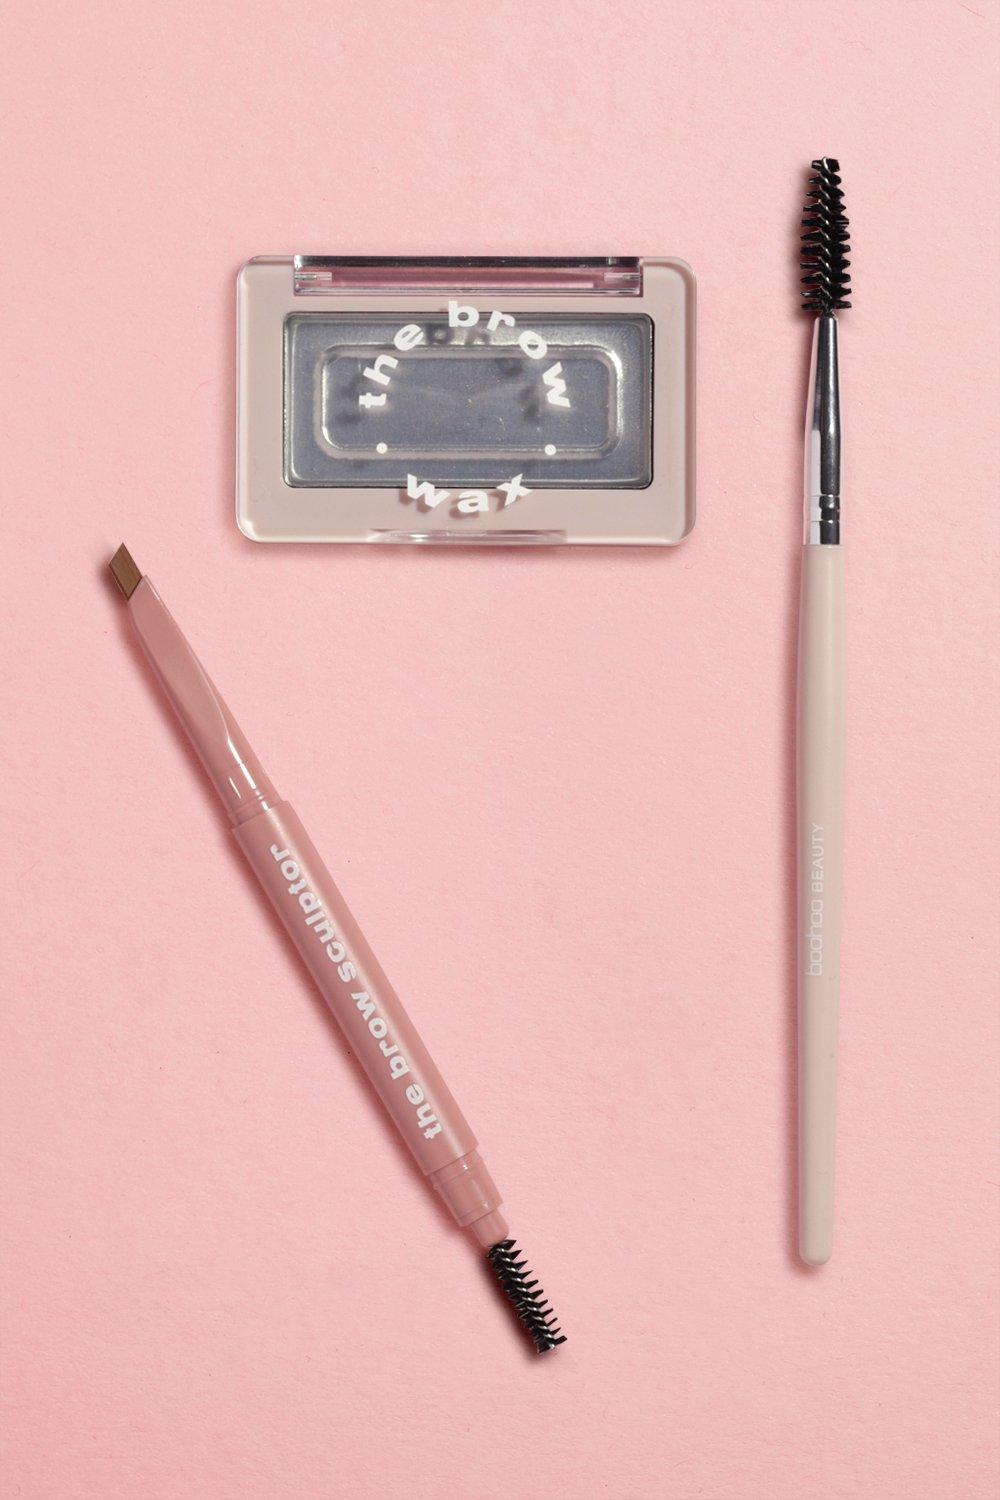 Boohoo Beauty Brow Pencil, Brow Soap & Brow Brush- Beige  - Size: ONE SIZE